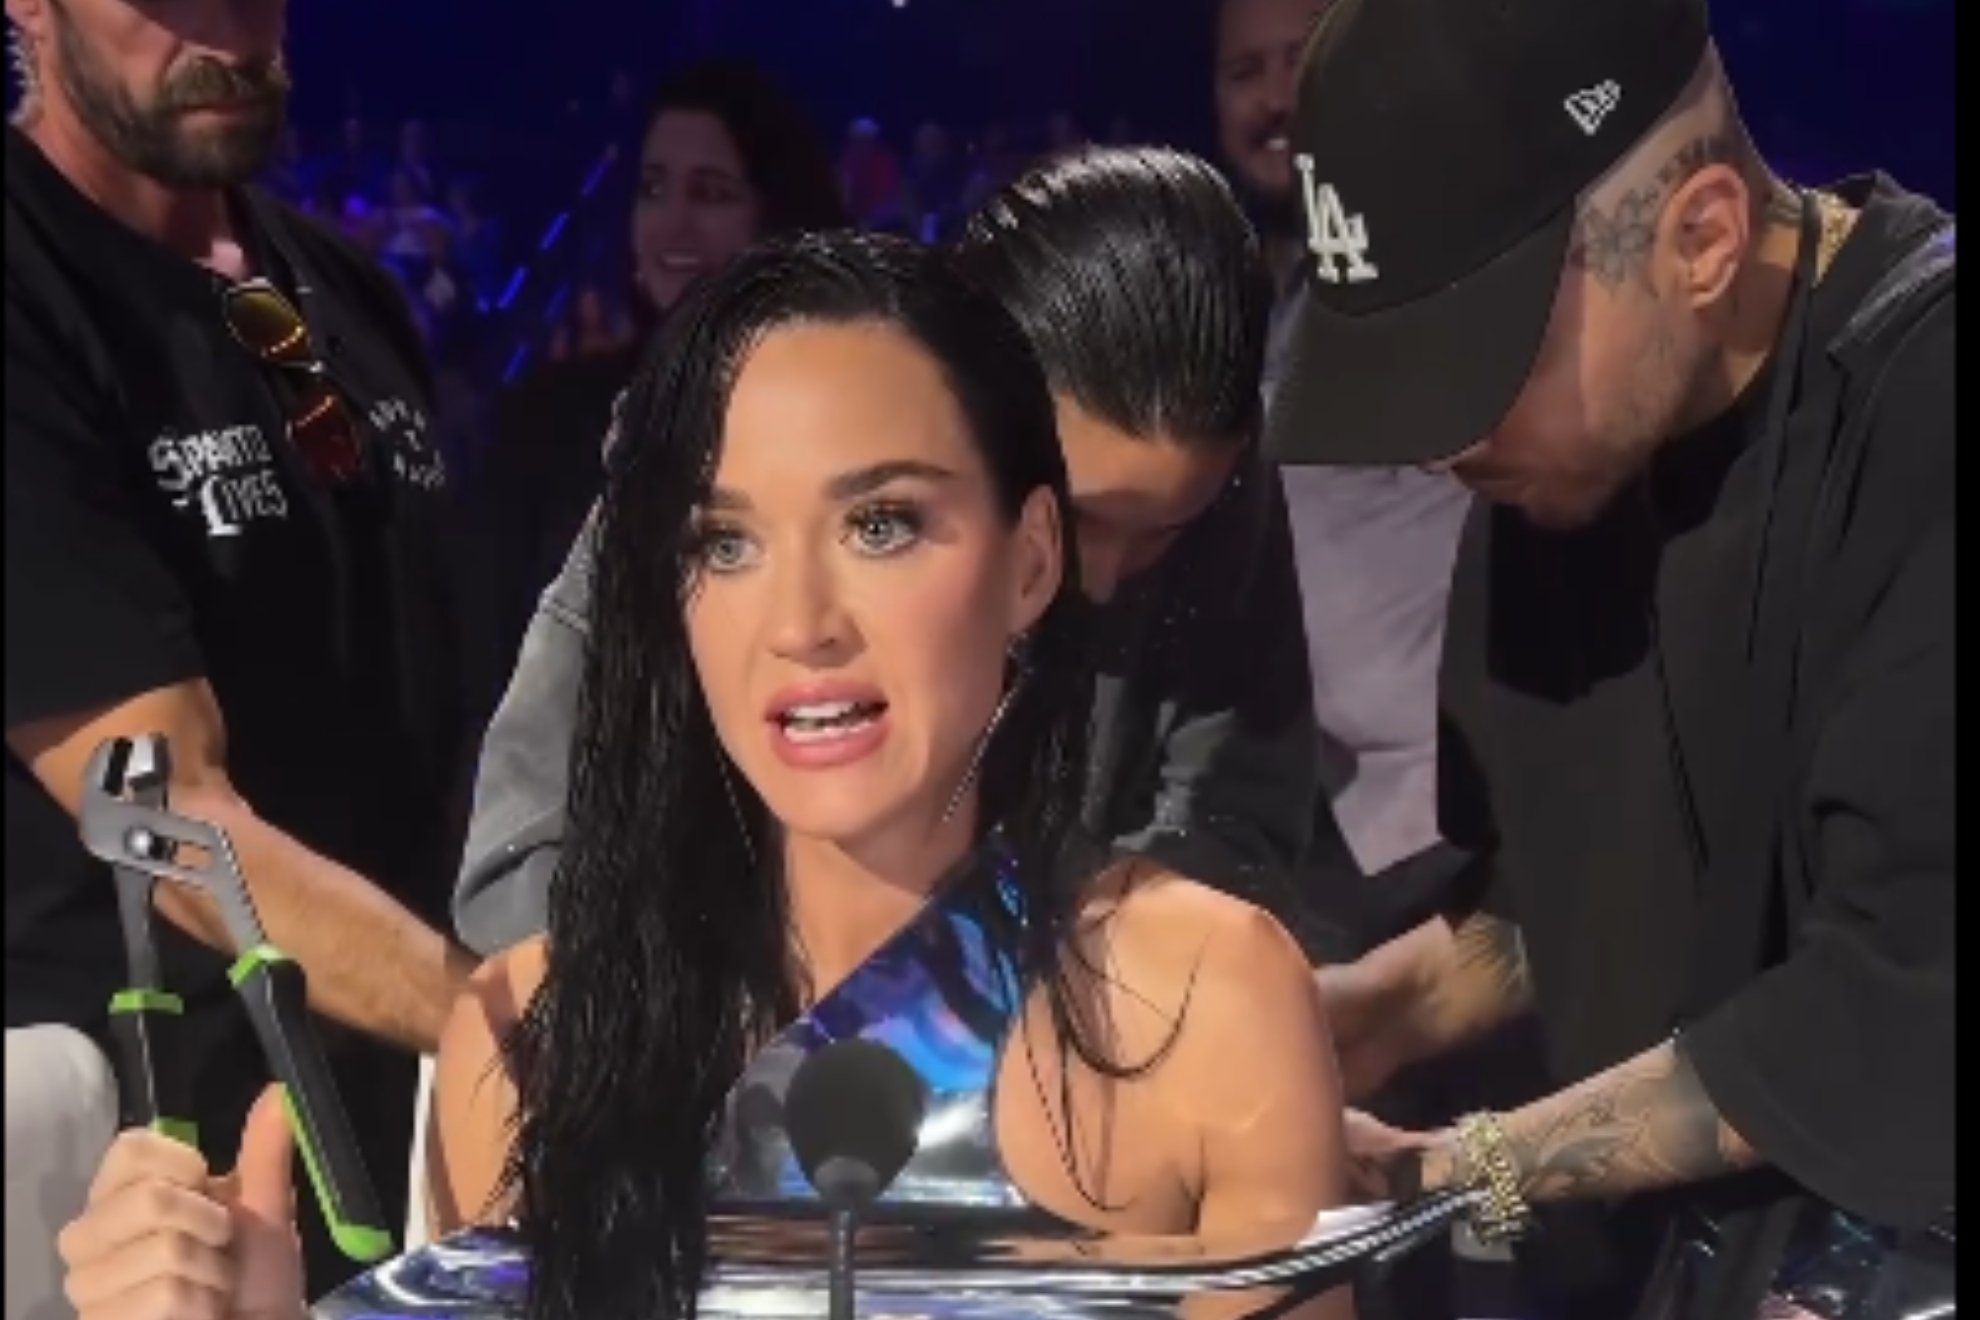 Katy Perry slips up during a live show and falls out of the top of her outlandish outfit